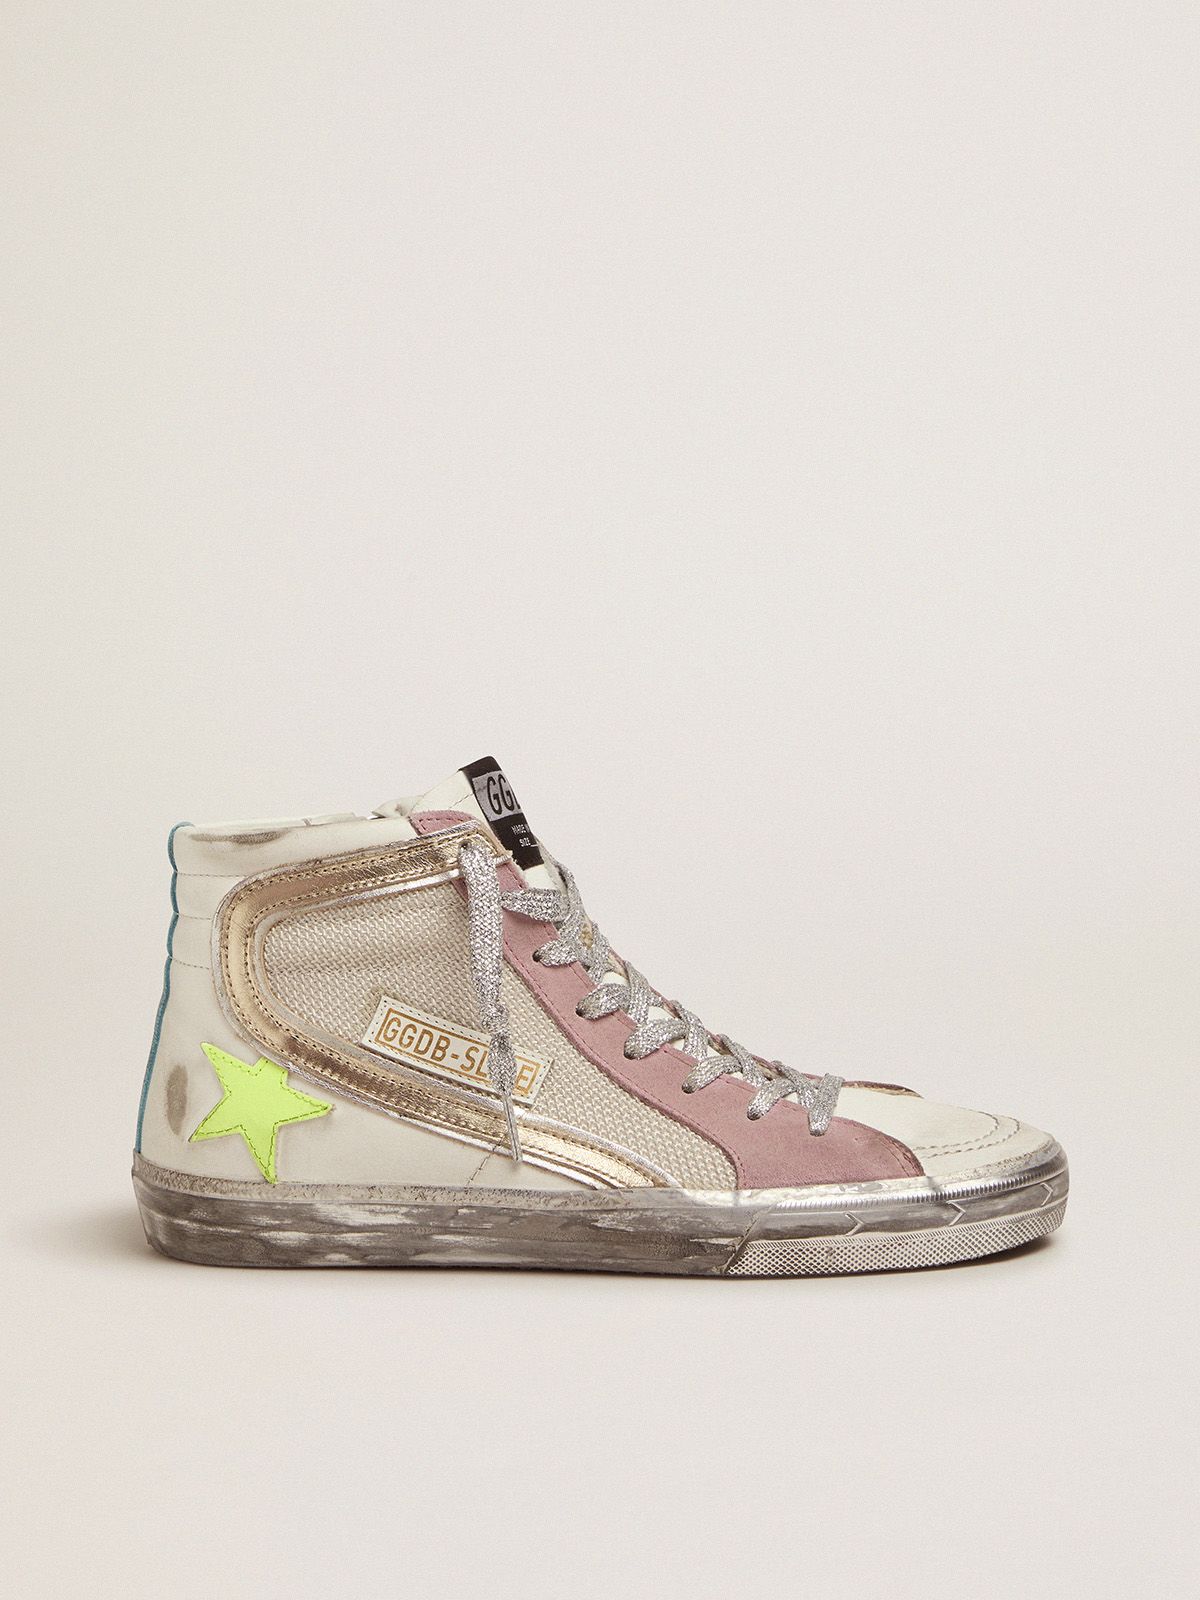 golden goose Slide sneakers pink upper and white with